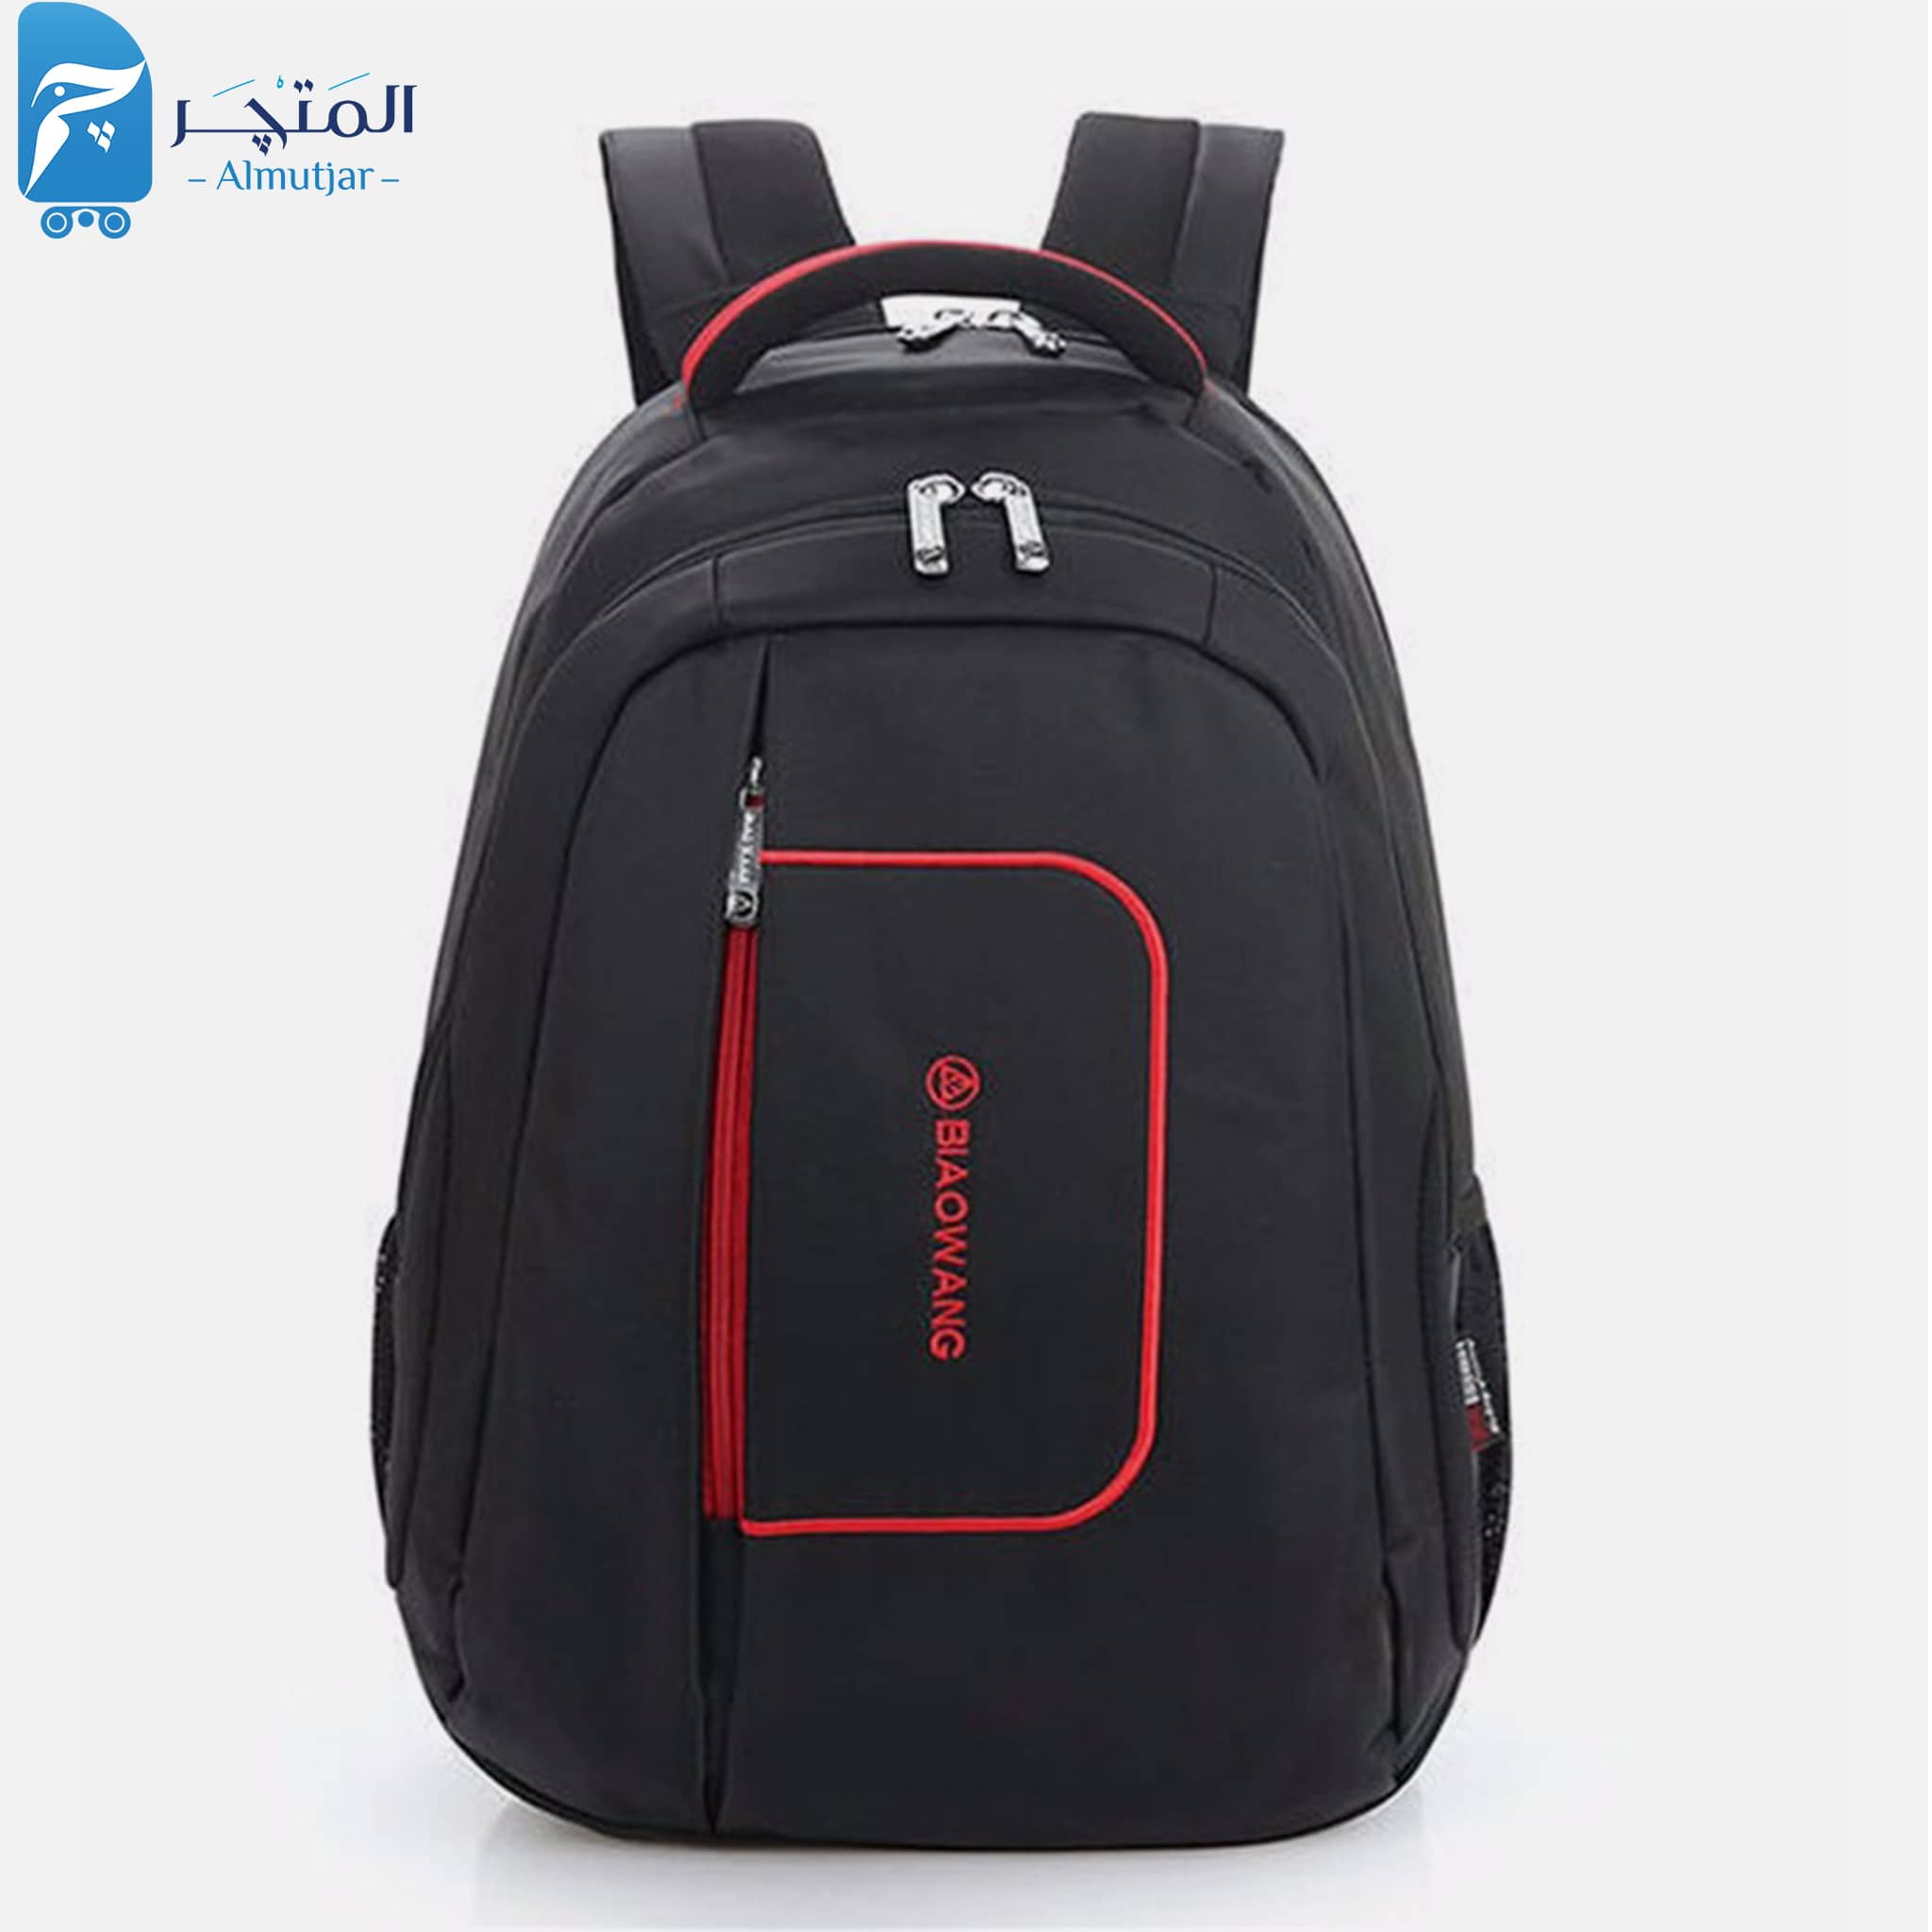 Biaowang Laptop backpack 15.6 inch bag with USB charging multi-function bag